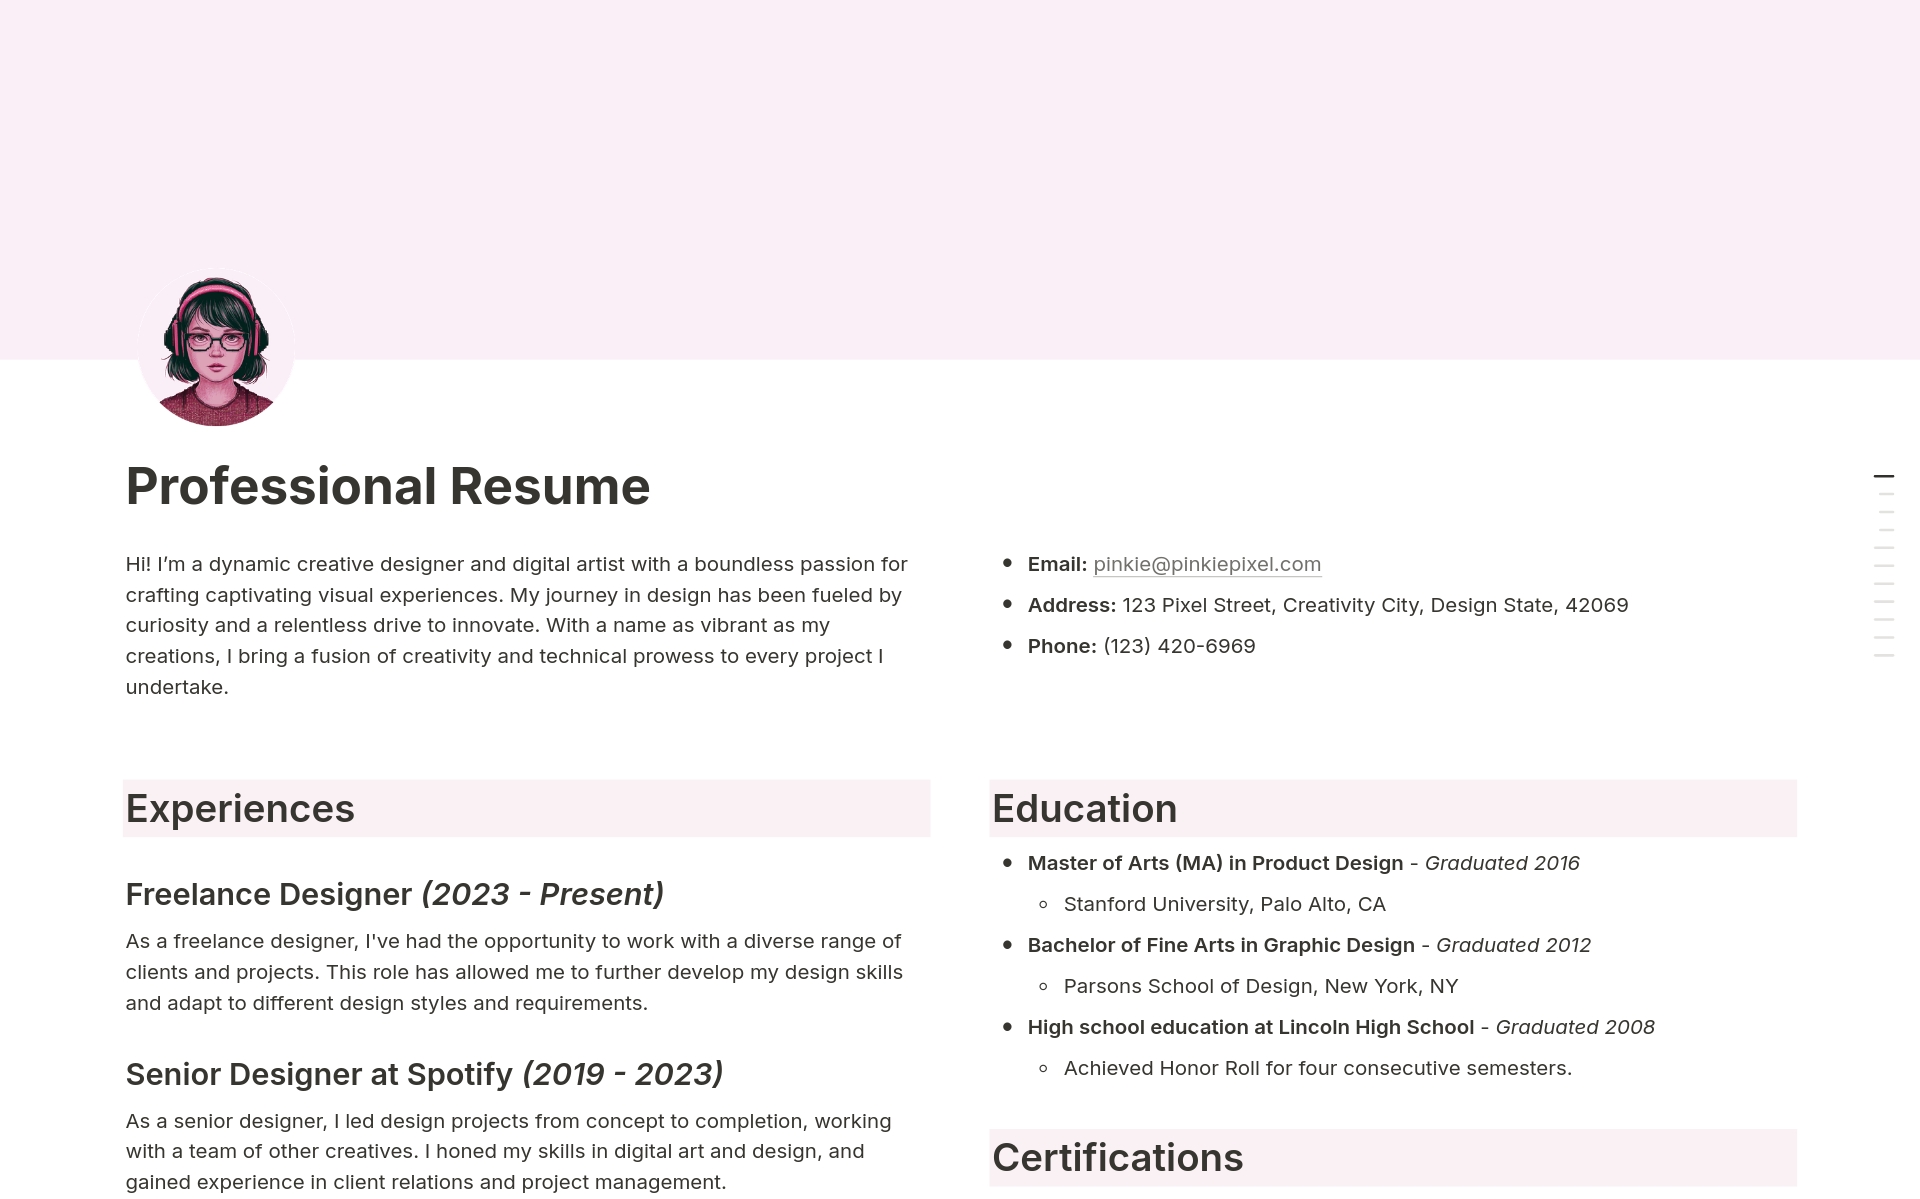 This Professional Resume Notion template is tailor-made for professionals seeking to showcase their creativity and expertise. Its sleek and customizable format highlights your experiences, education, skills, achievements, and portfolio.